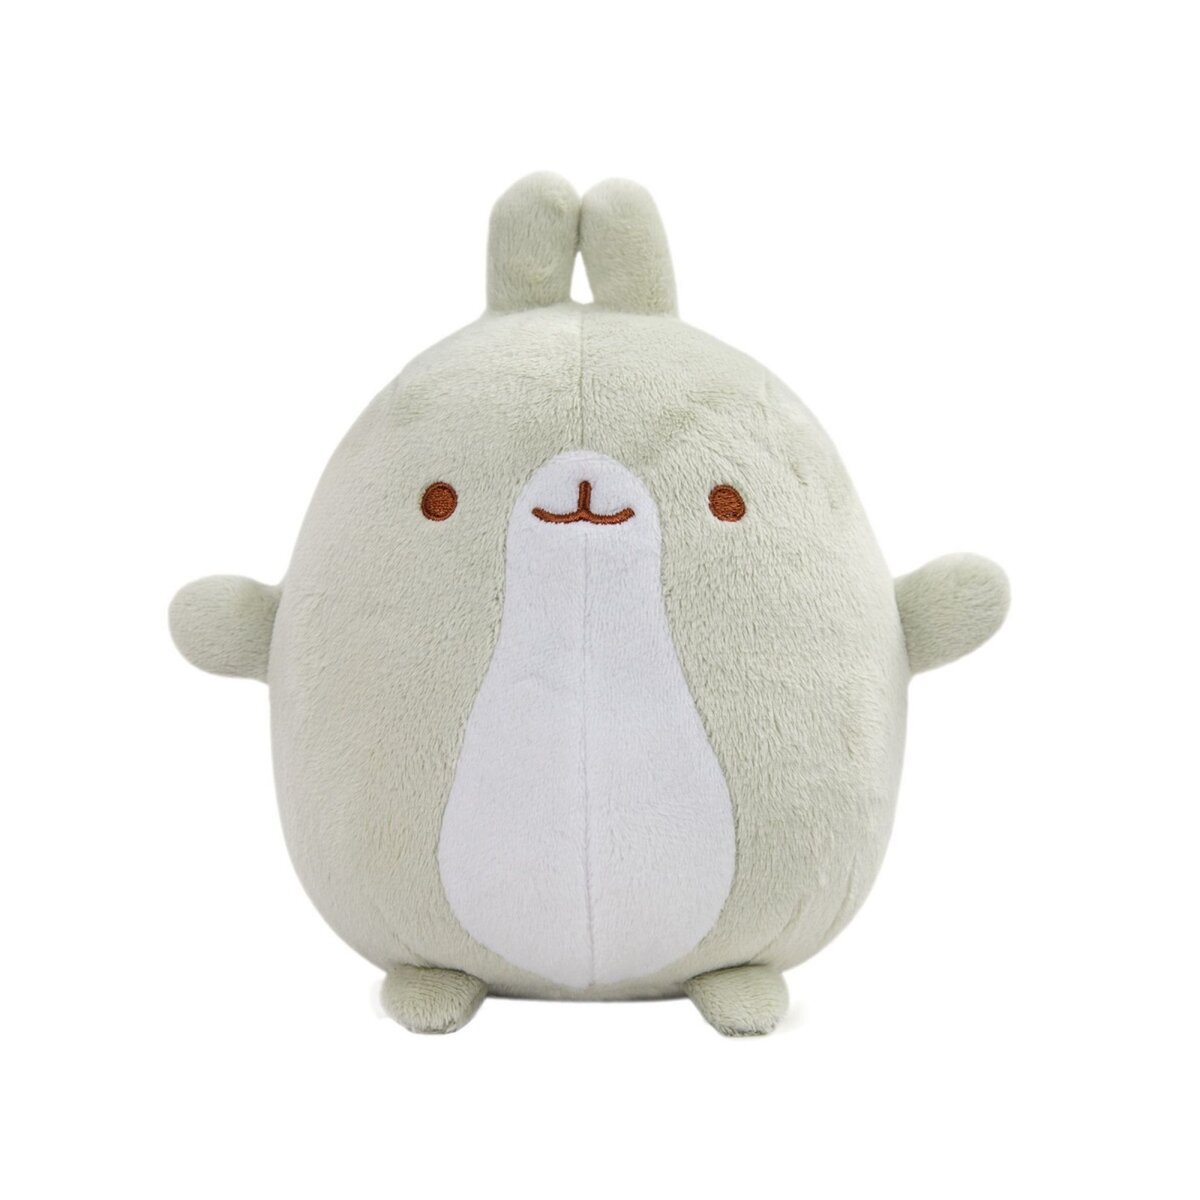 TOMY Peluches Molang ses amis 20 cm pas cher 